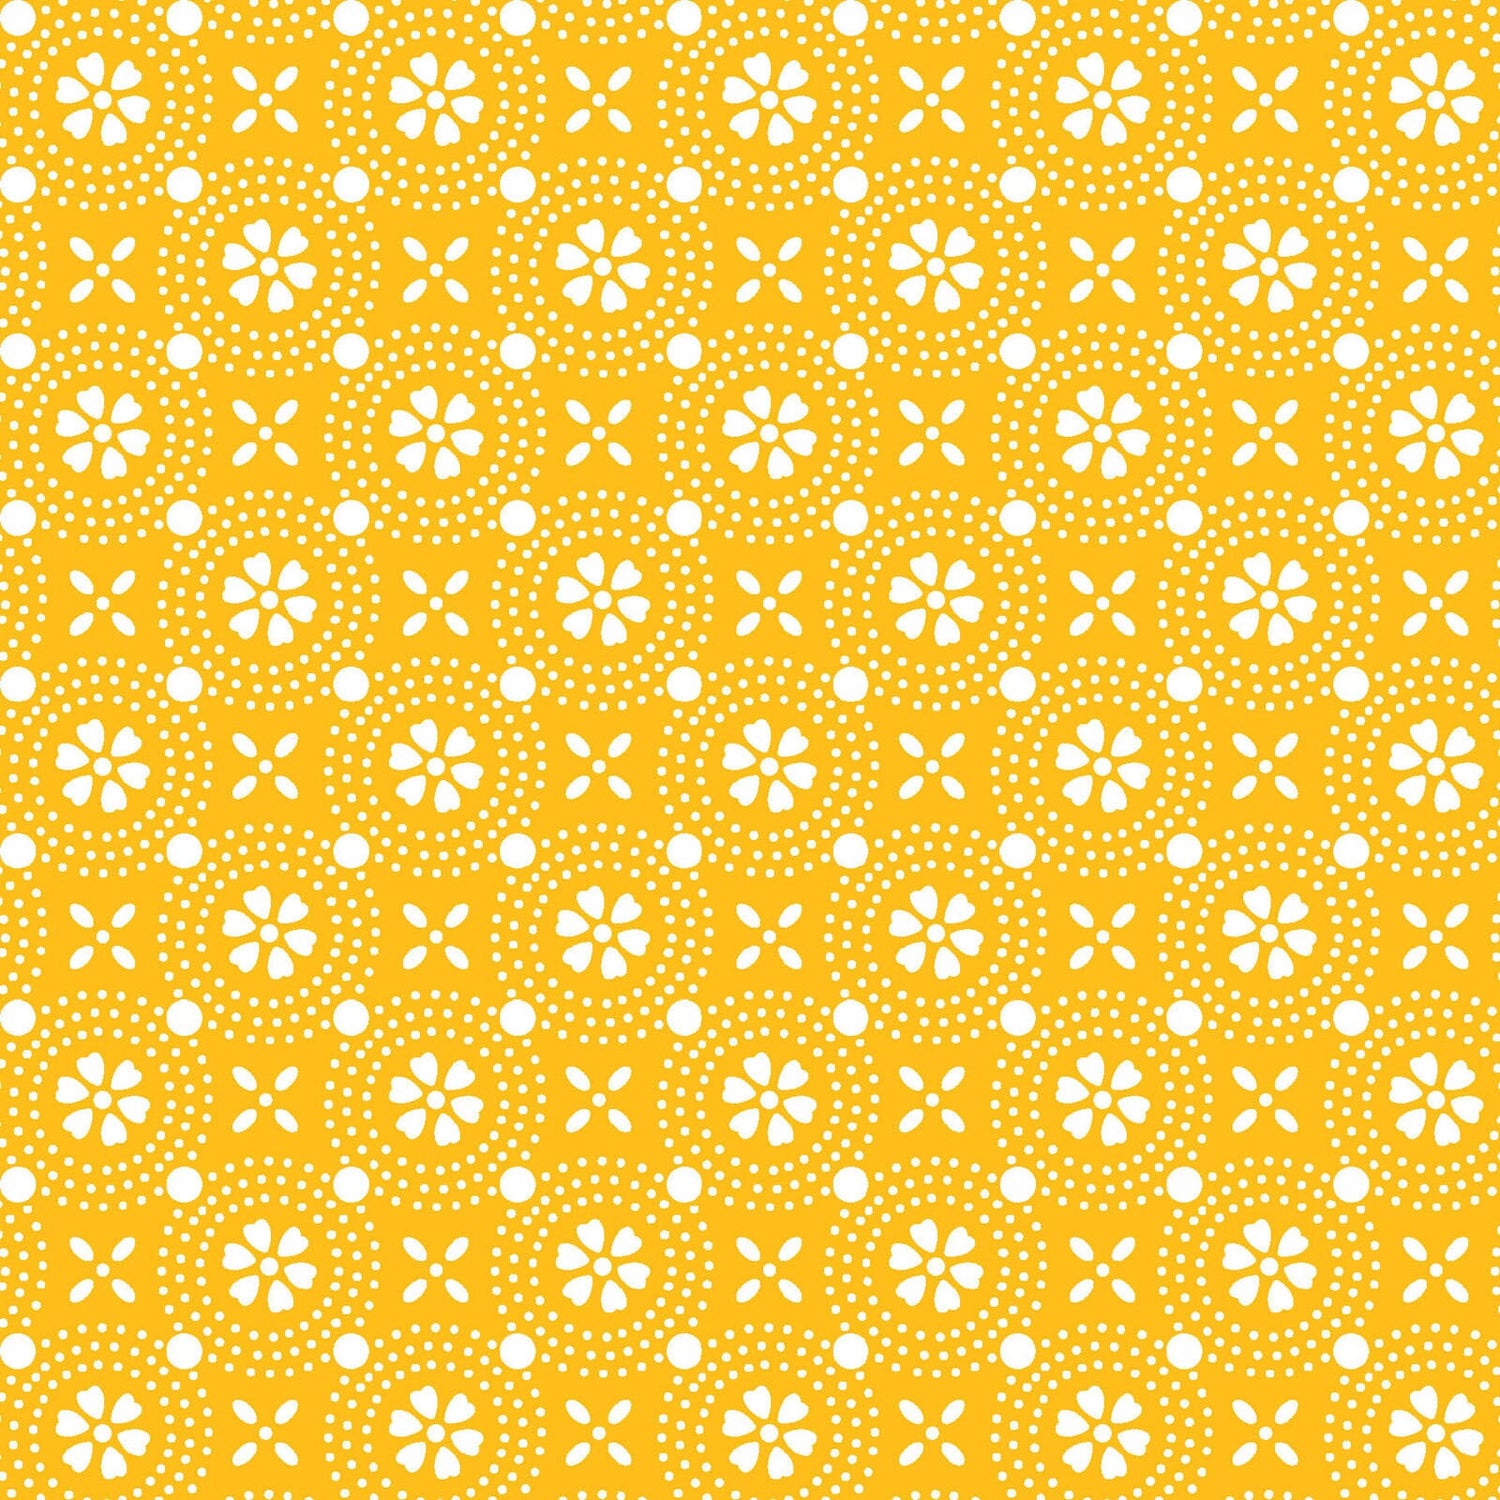 Yellow Dotted Circles Designed by Kim Christopherson of Kimberbell Designs for Maywood Studios